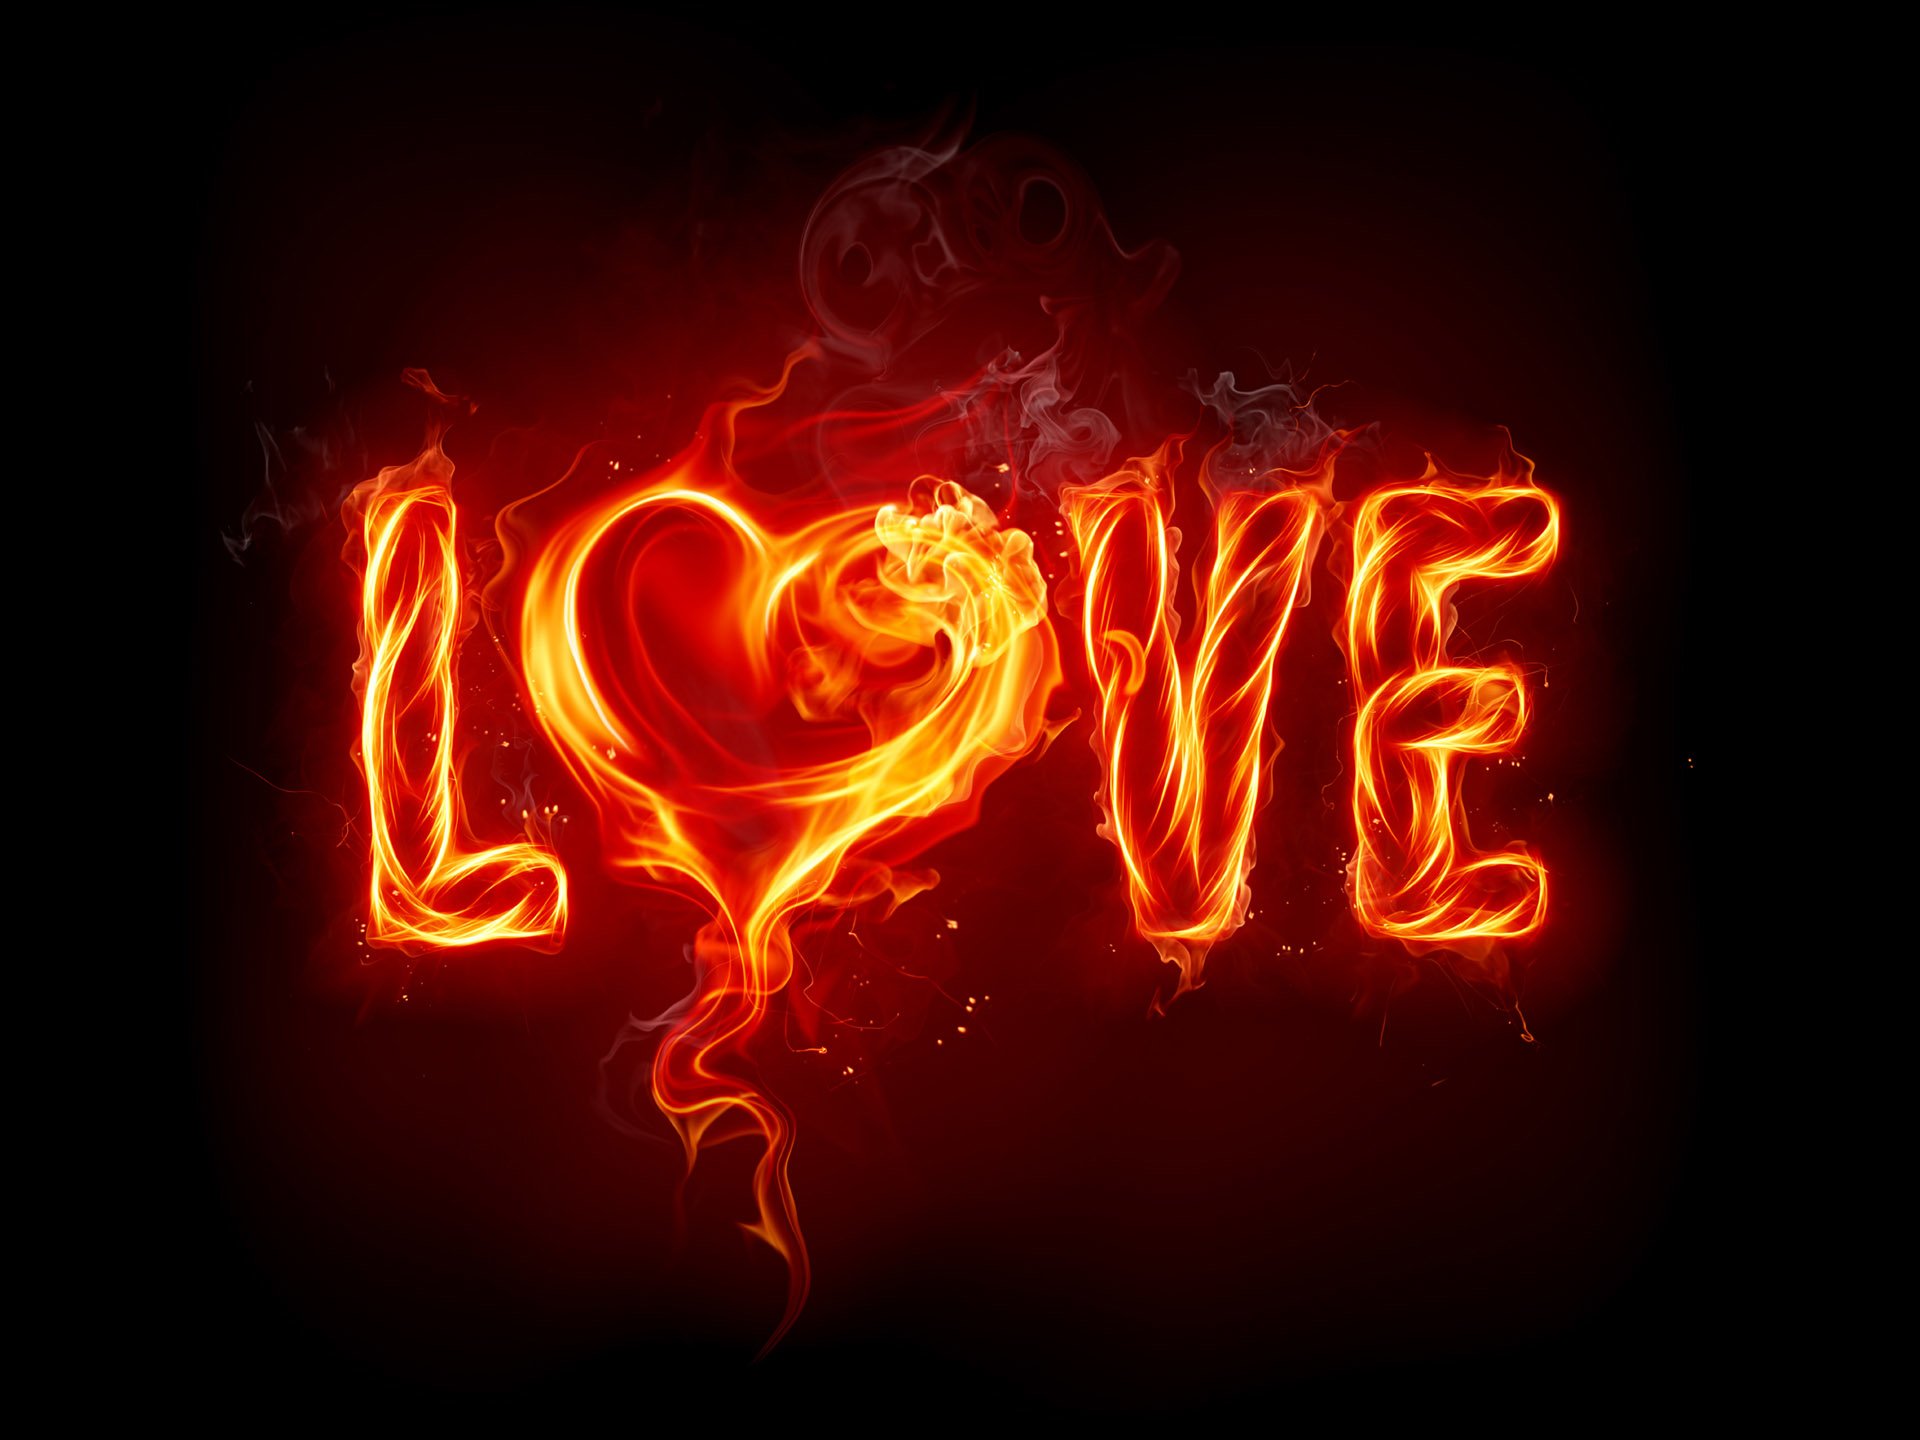 726 Love HD Wallpapers | Backgrounds - Wallpaper Abyss